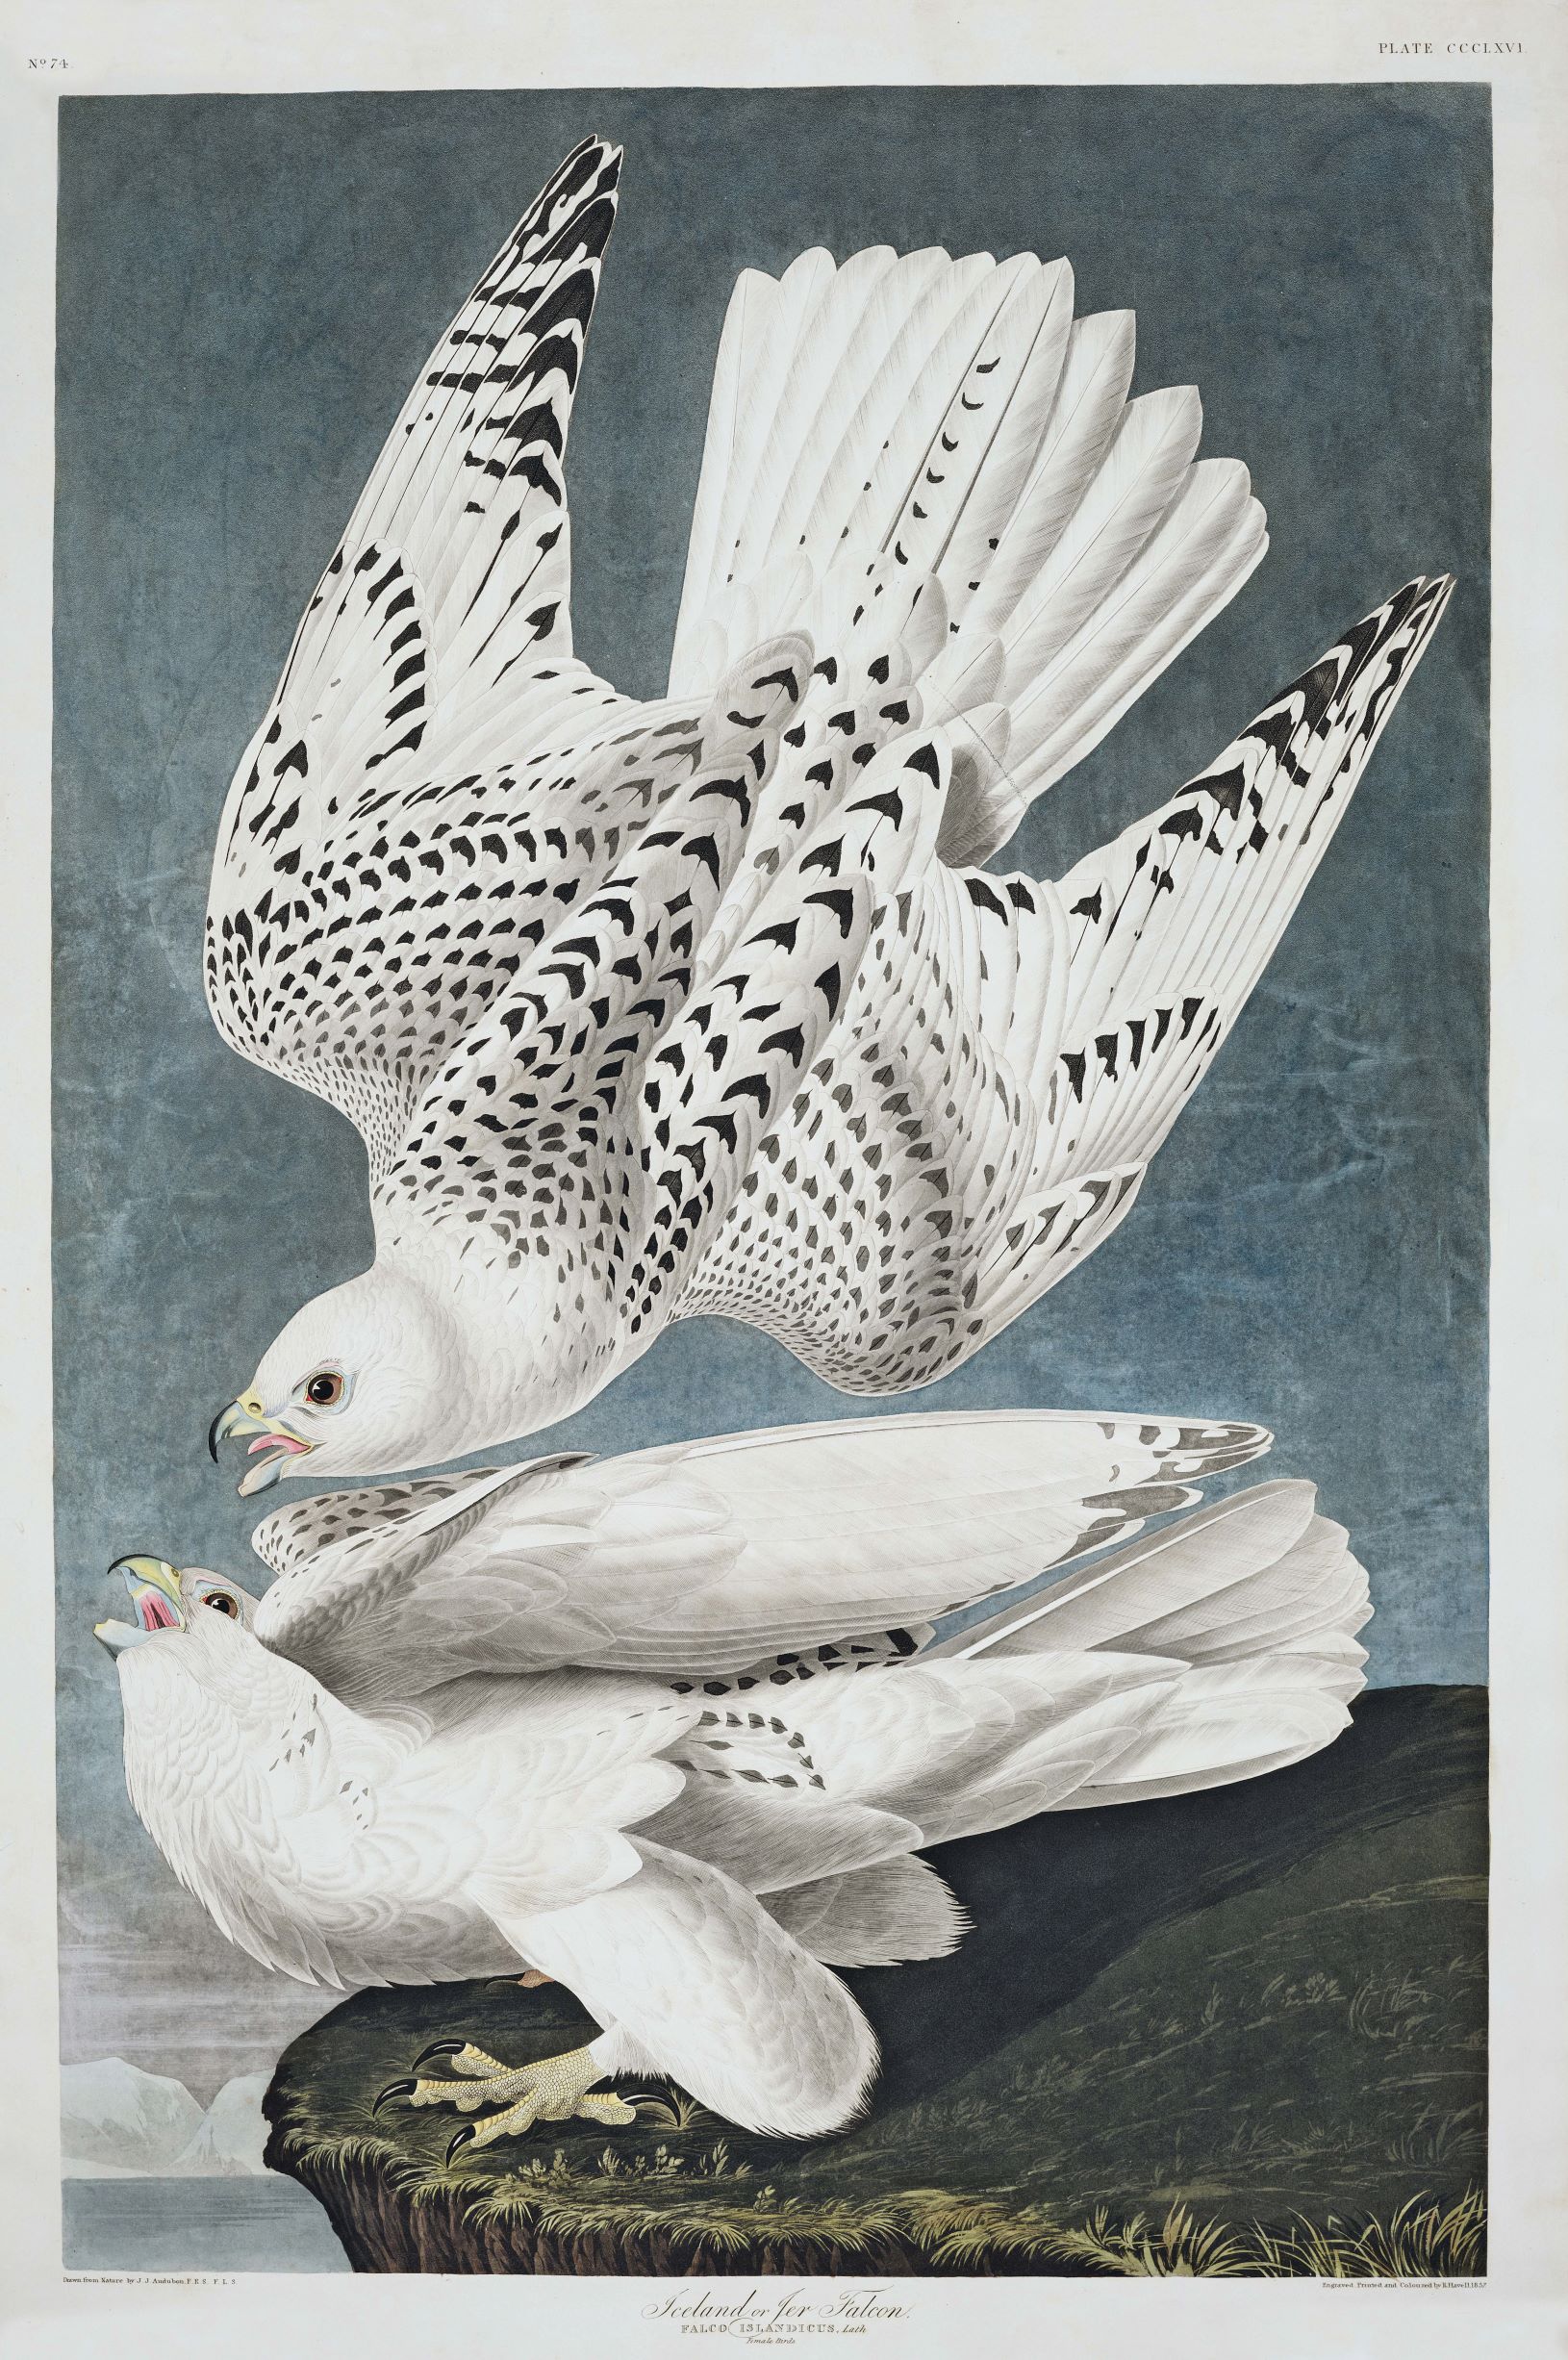 John James Audubon, Iceland, Iceland, or Jer Falcon (Falco islandicus), plate 366 from Birds of America, 1837. From Animal